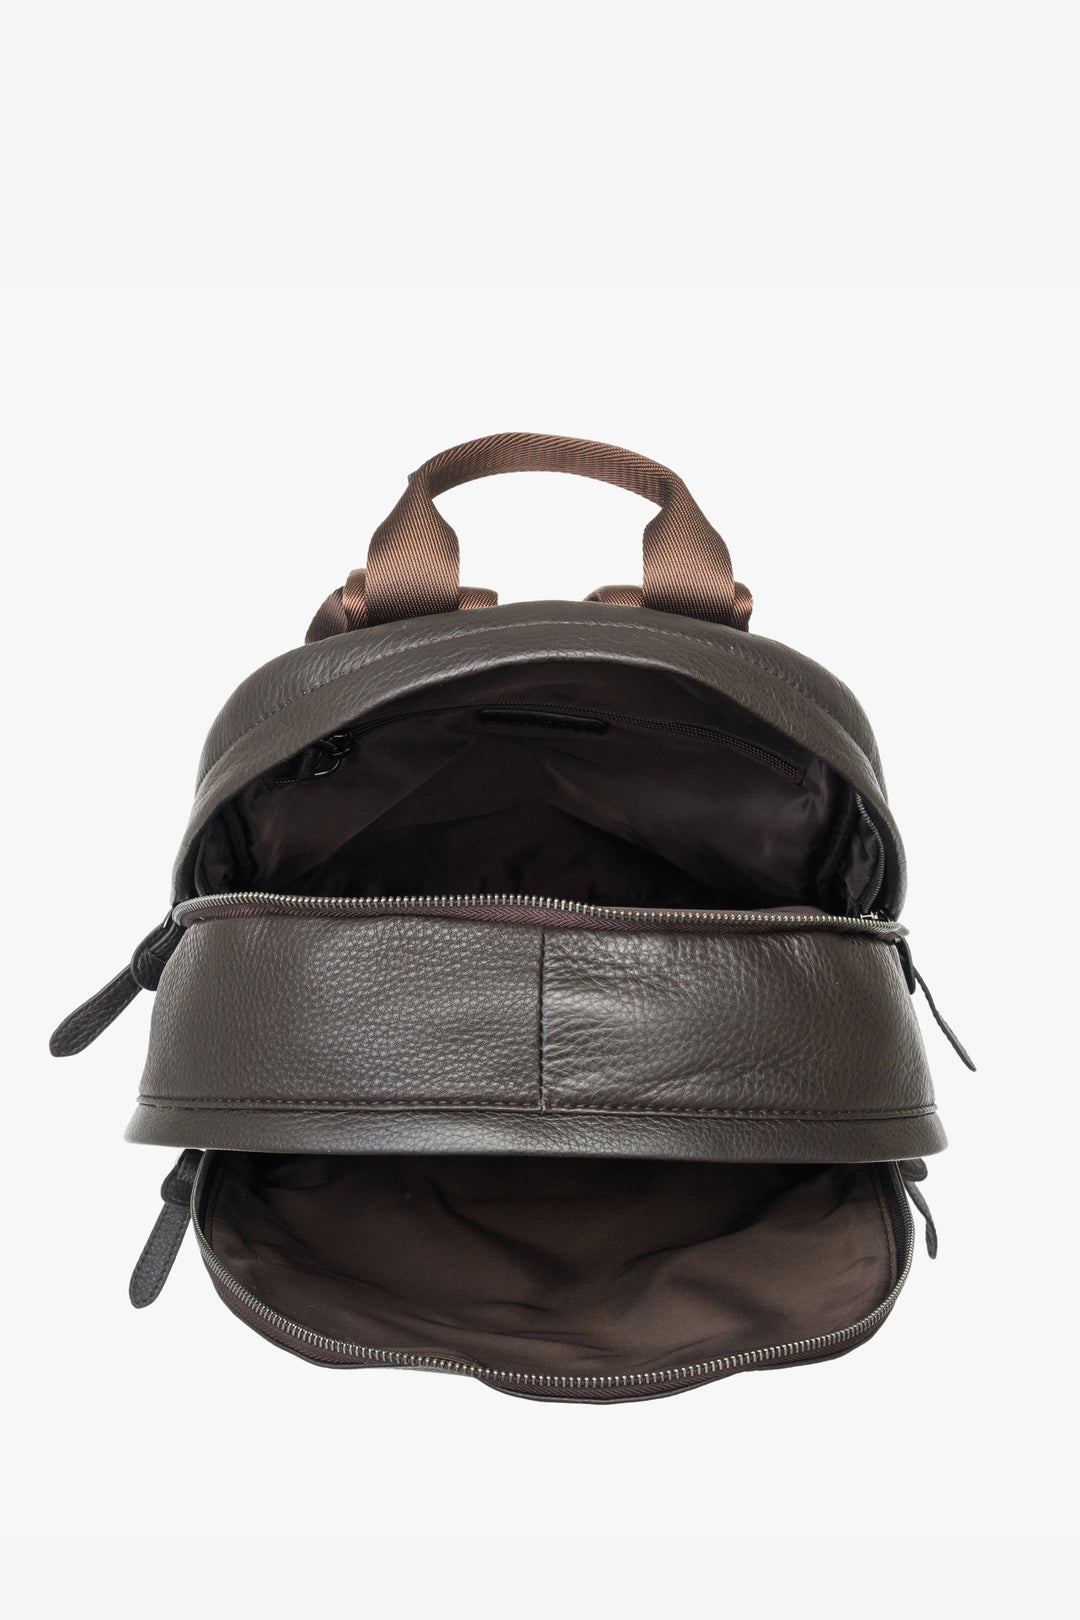 Men's dark brown large backpack by Estro made of genuine leather - close-up on the interior design.